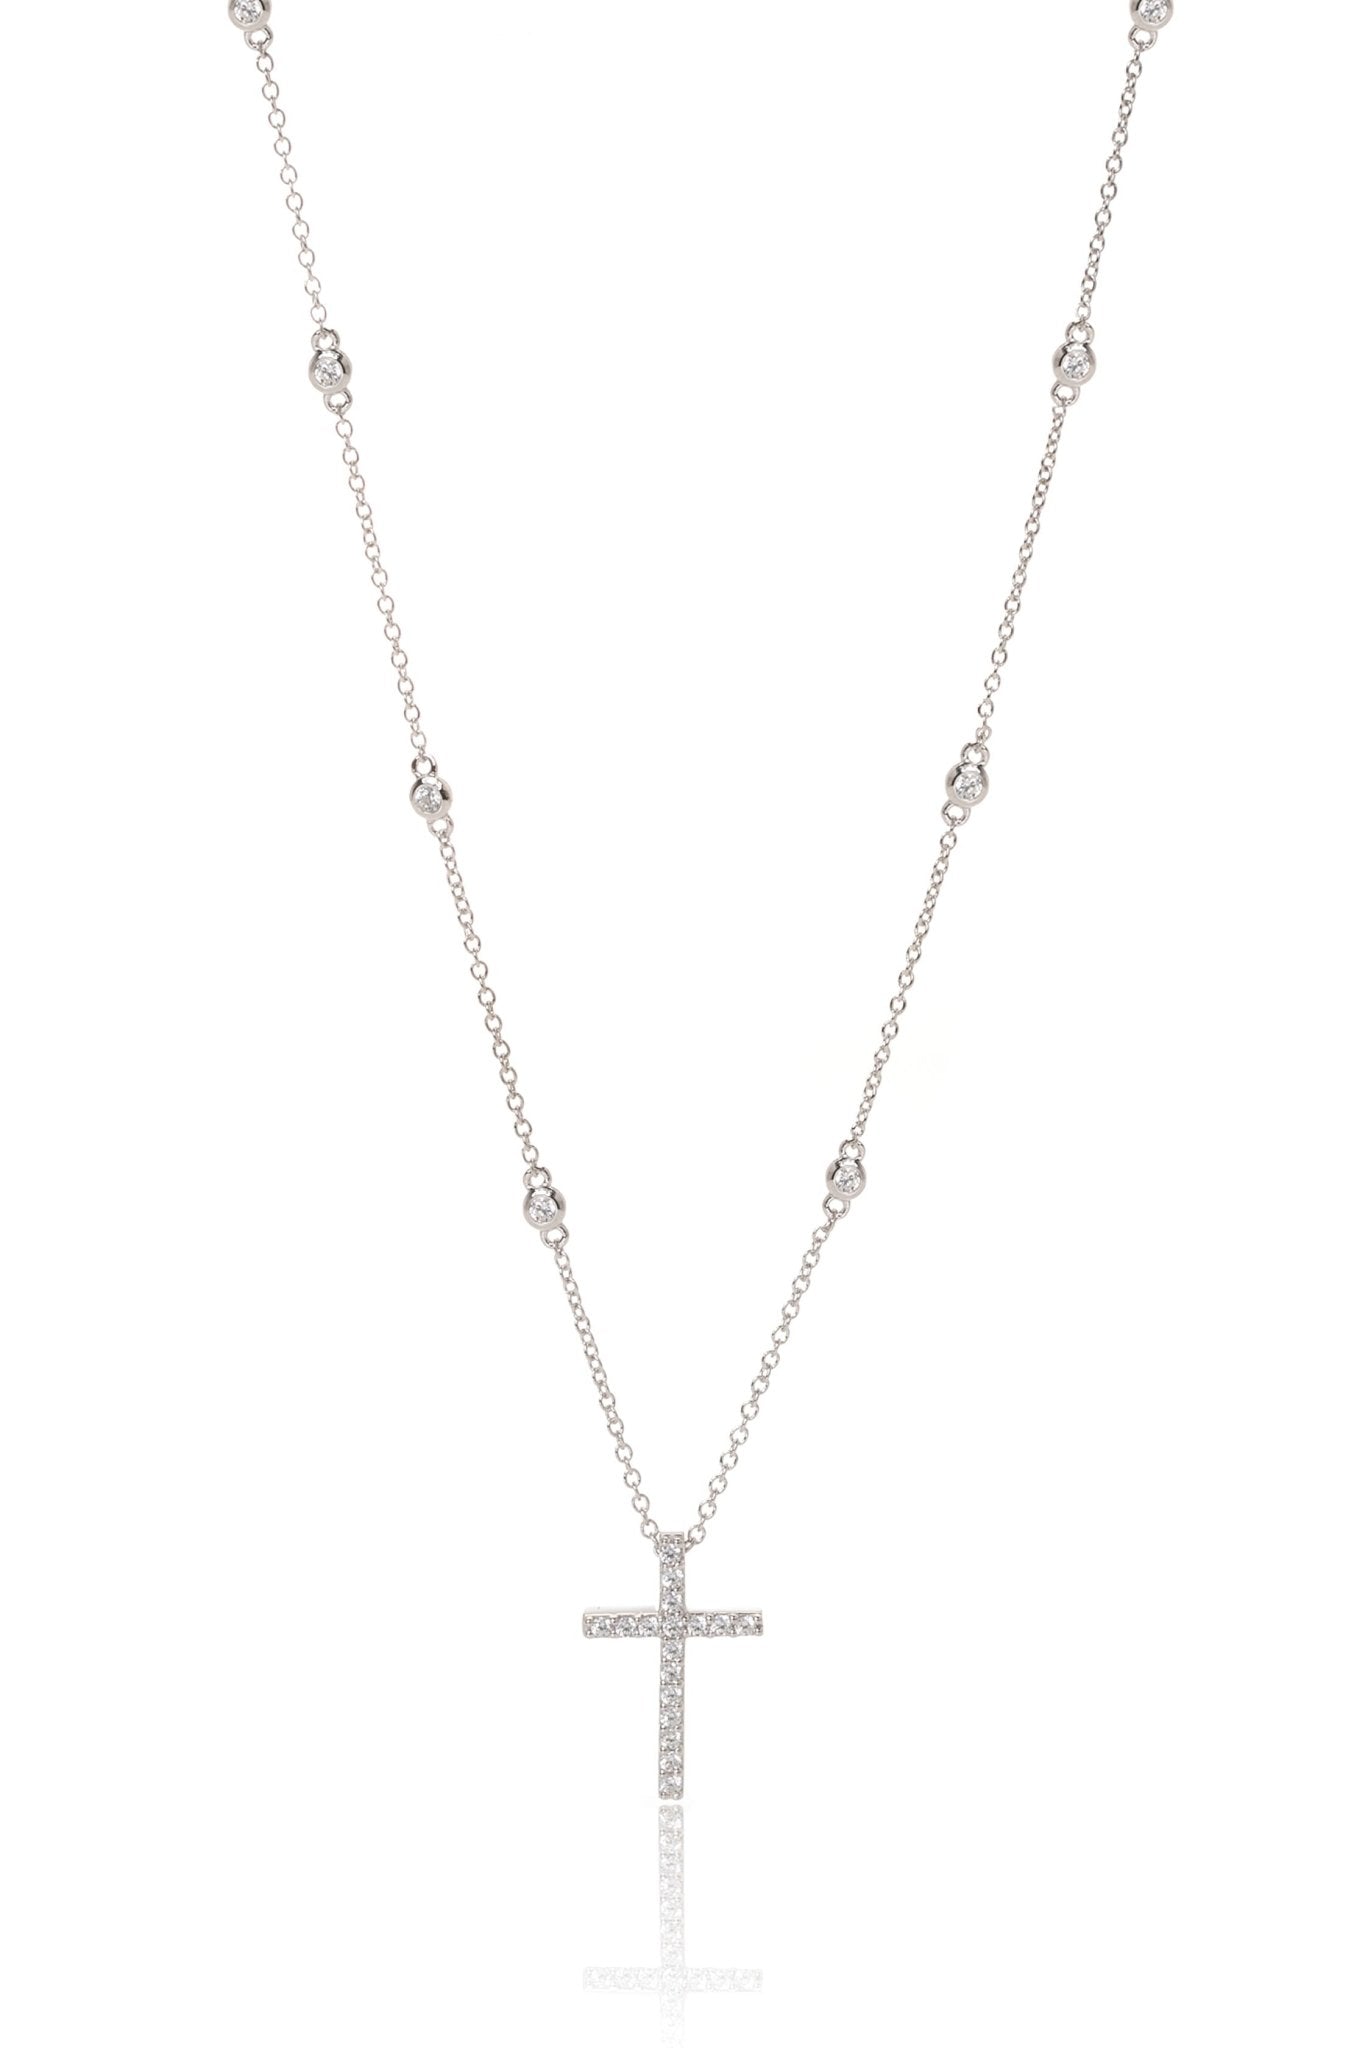 Sparkling Cubic Zirconia Cross Pendant Necklace in 925 Sterling Silver (43cm) - RubyJade